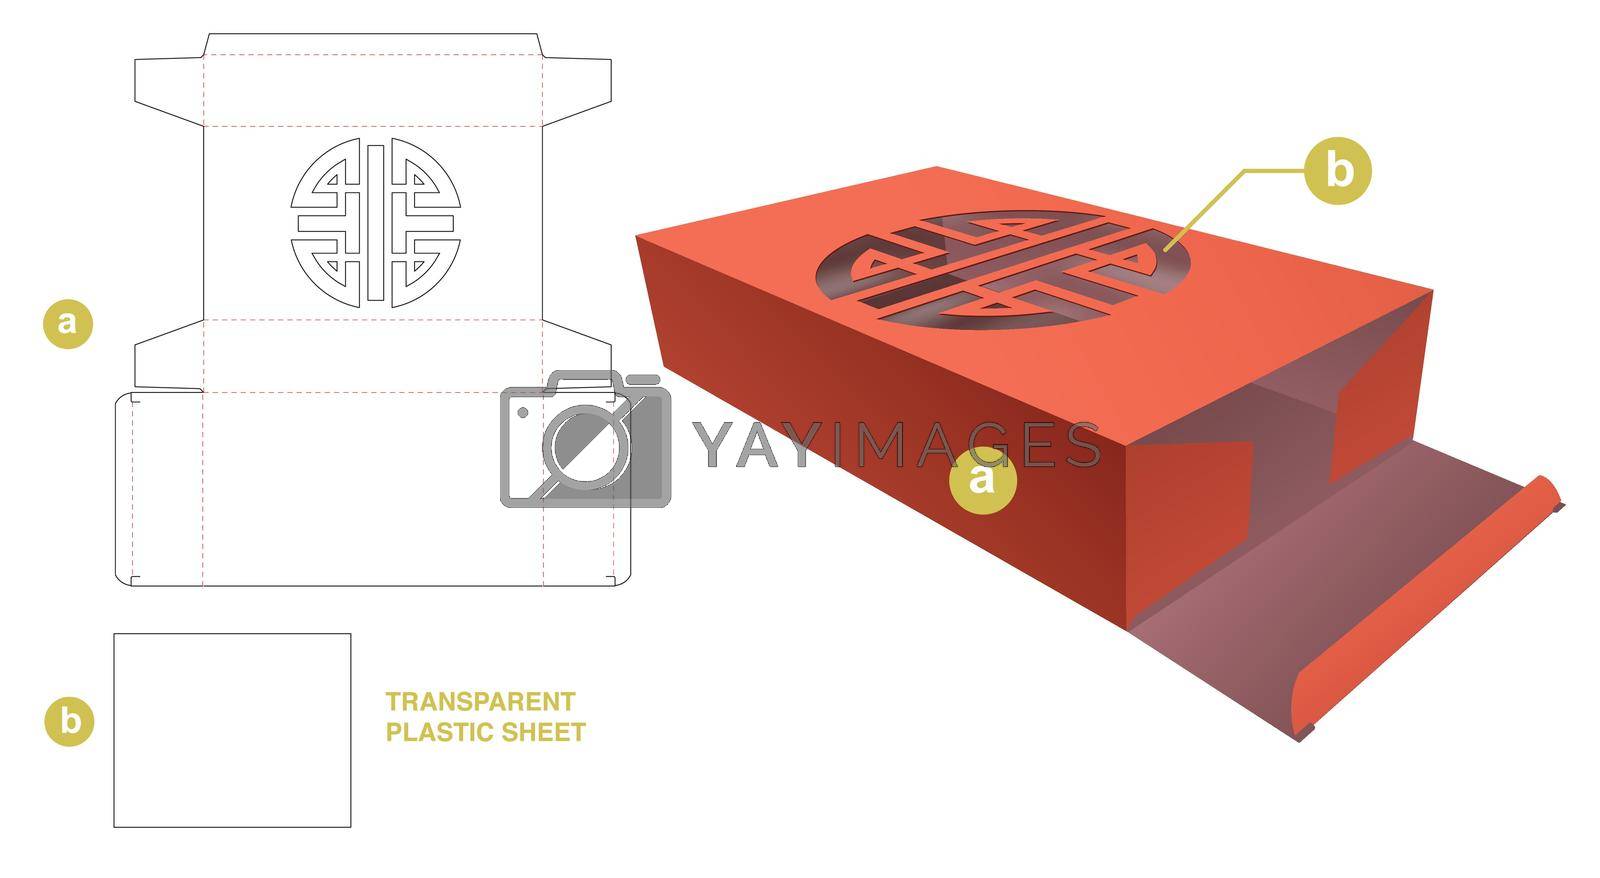 Royalty free image of Cardboard box with stenciled Chinese and transparent plastic sheet side die cut template by valueinvestor